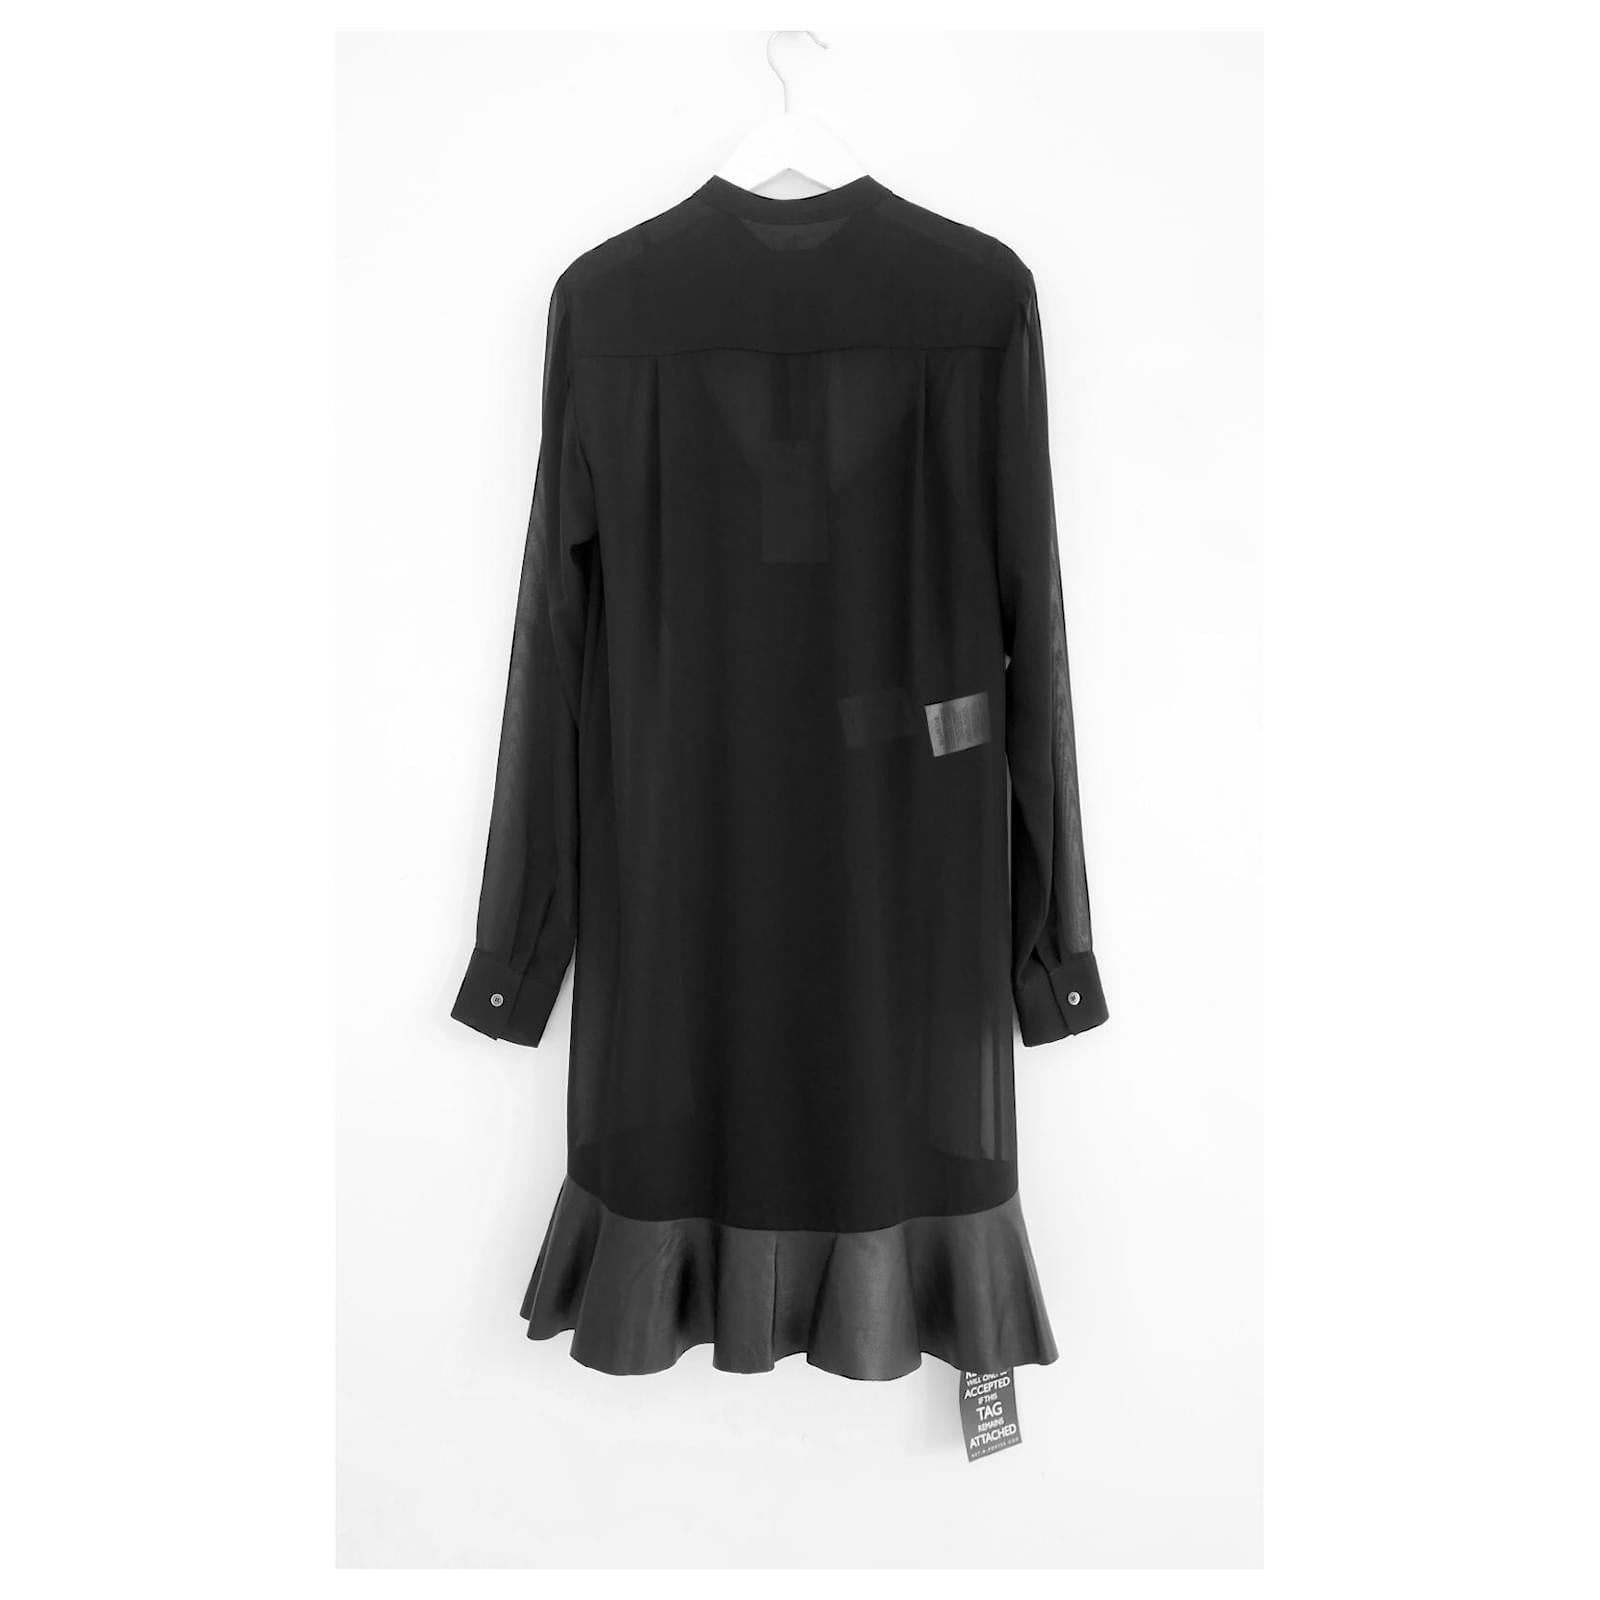 McQ Alexander McQueen Pre-Fall 2014 Leather Skirt Shirt Dress In New Condition For Sale In London, GB